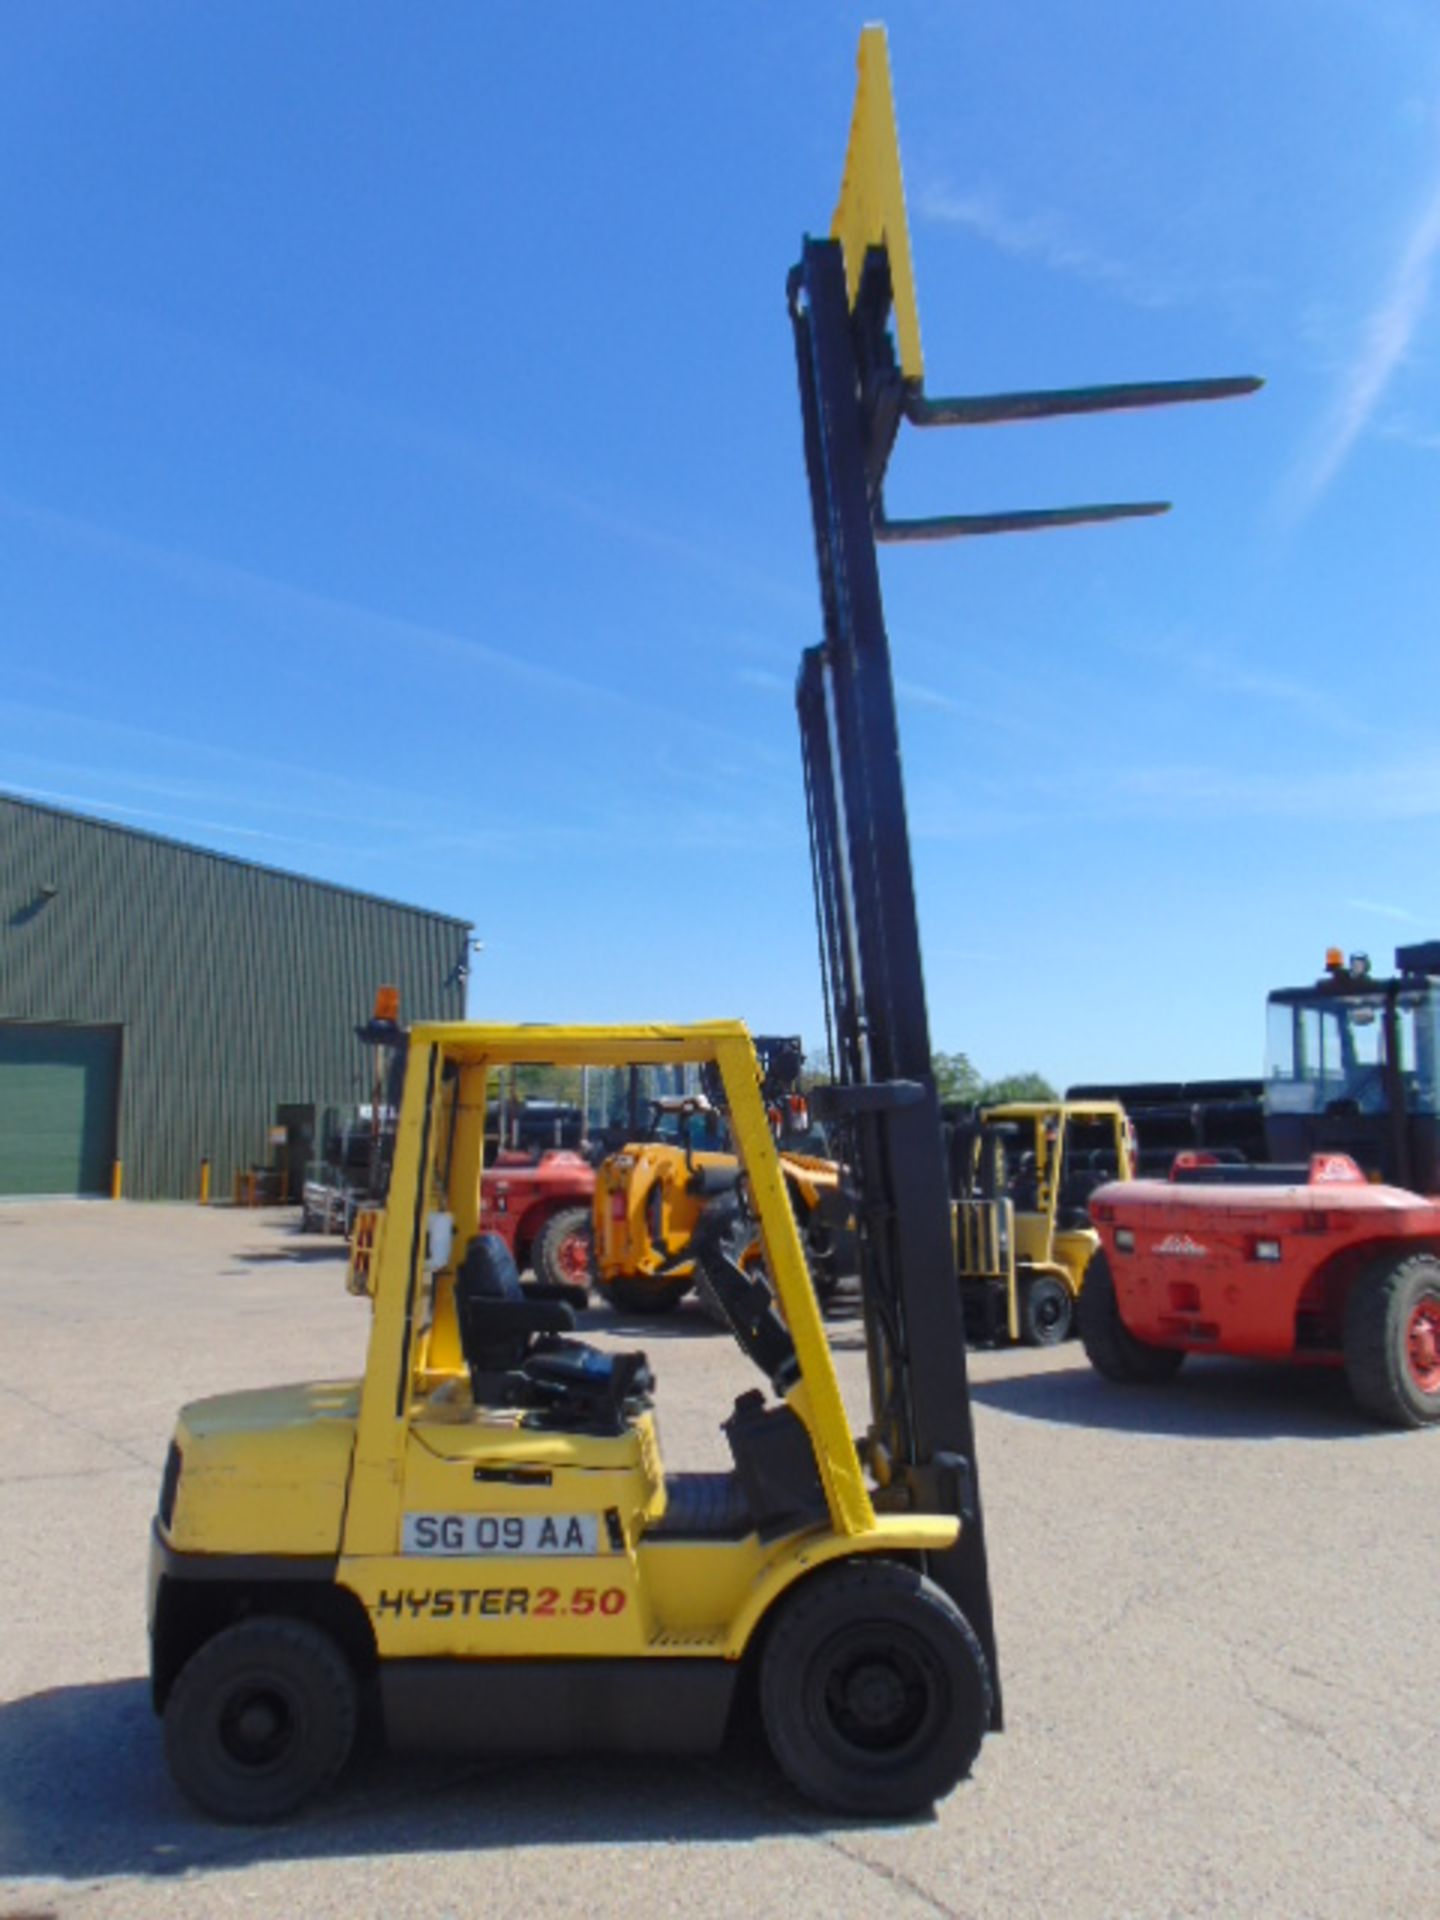 Hyster 2.50 Class C, Zone 2 Protected Diesel Forklift ONLY 763.4 hours!! - Image 10 of 29